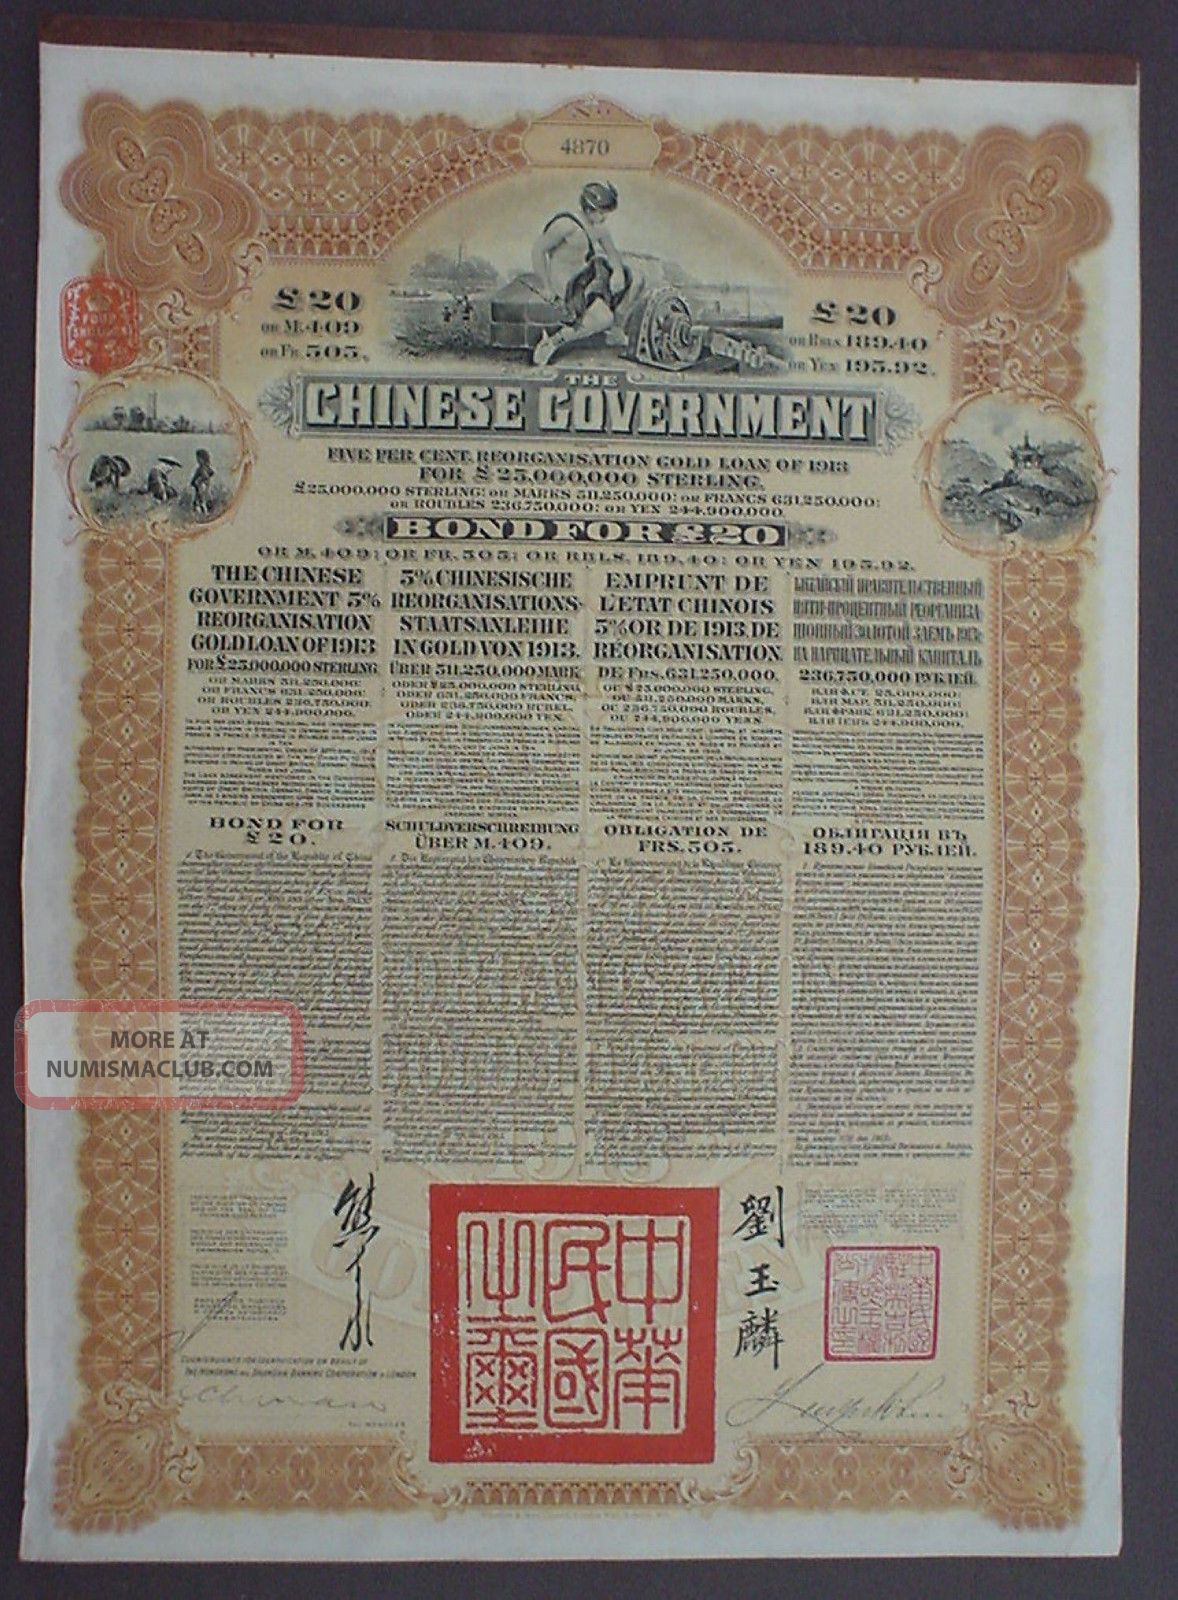 Chinese Government 5 Gold Loan 20 Pound Sterling 1913 Uncancelled Stocks & Bonds, Scripophily photo